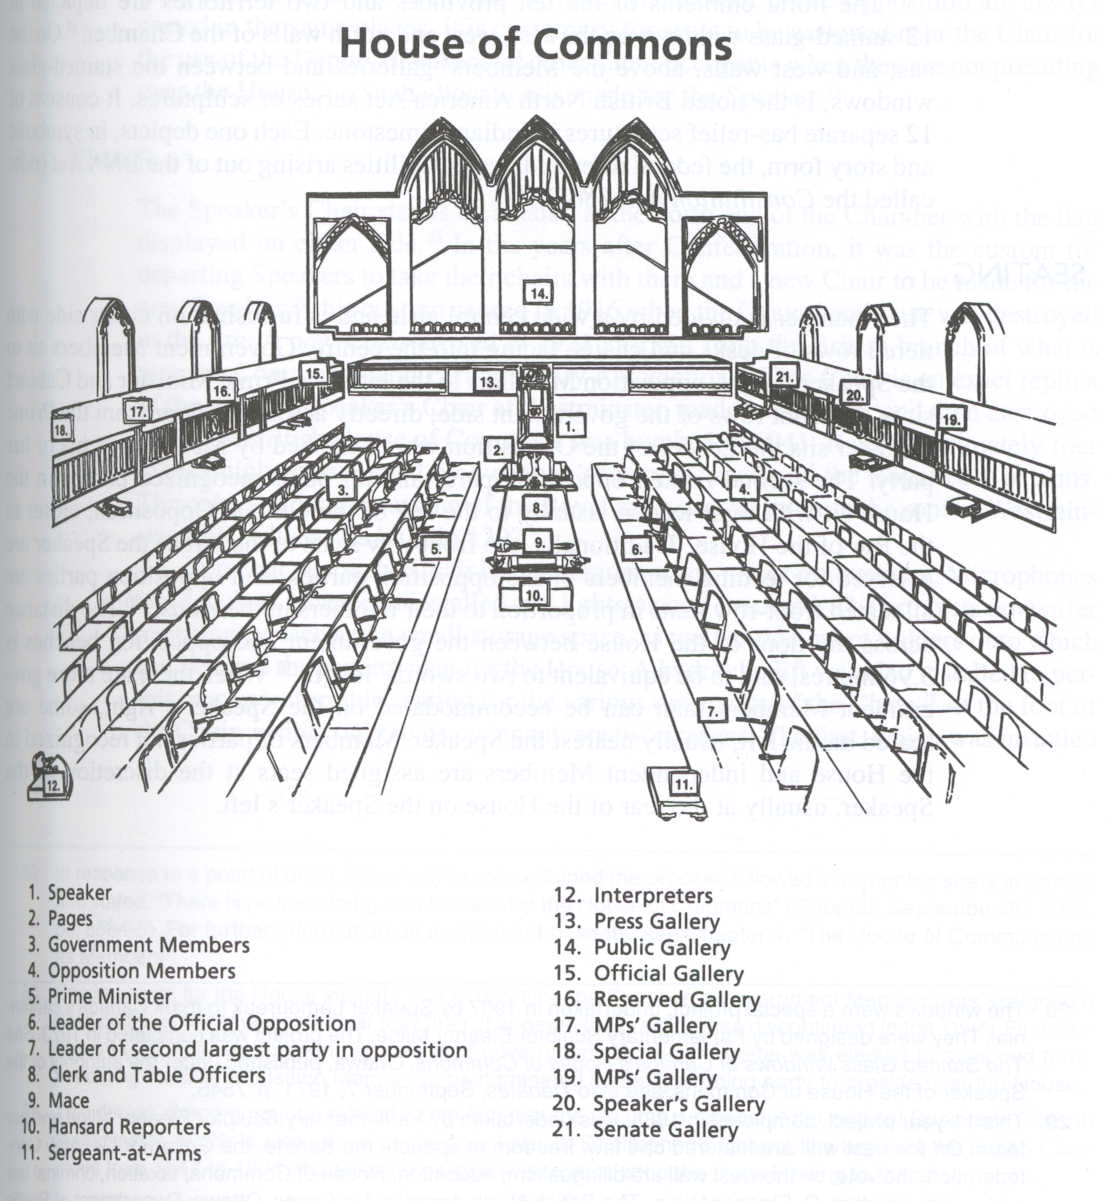 Image of the physical layout of the House of Commons. At the top of the image are the public galleries. Below the galleries, in the centre of the image and the Chamber, are the Speaker’s chair, the seats for the Pages, the Table for the Clerks and Table Officers, the Mace sitting on the Table, seats for the Hansard Reporters, and finally the Sergeant-at-Arms desk at the South end of the Chamber. To the left of the image are the seats for government members and above them various galleries for visitors. To the right of the image are the seats for opposition members and above them various galleries for visitors.